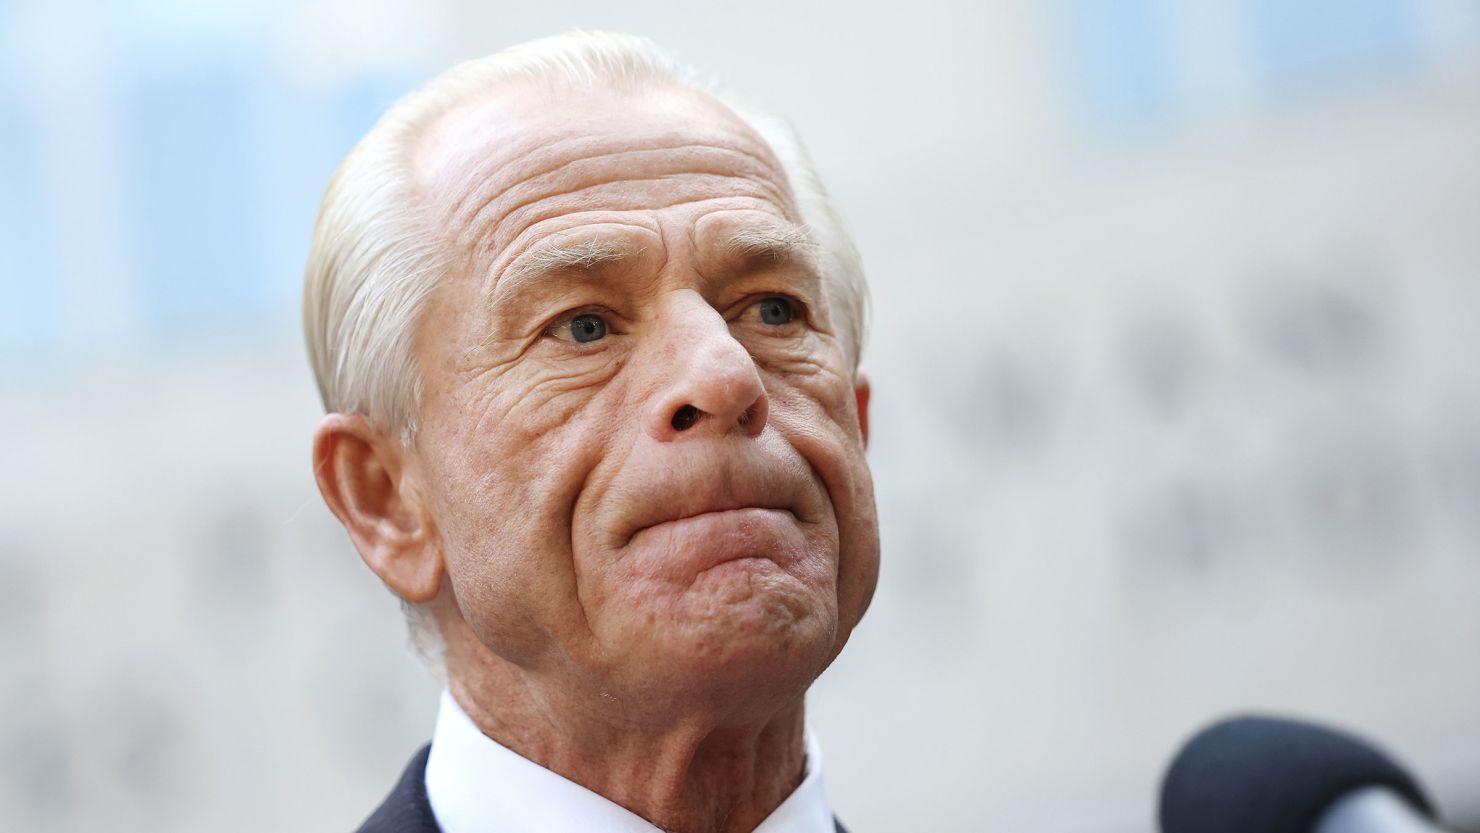 Peter Navarro, an advisor to former President Donald Trump, speaks to reporters as he arrives at the E. Barrett Prettyman Courthouse on September 7, 2023 in Washington, DC.